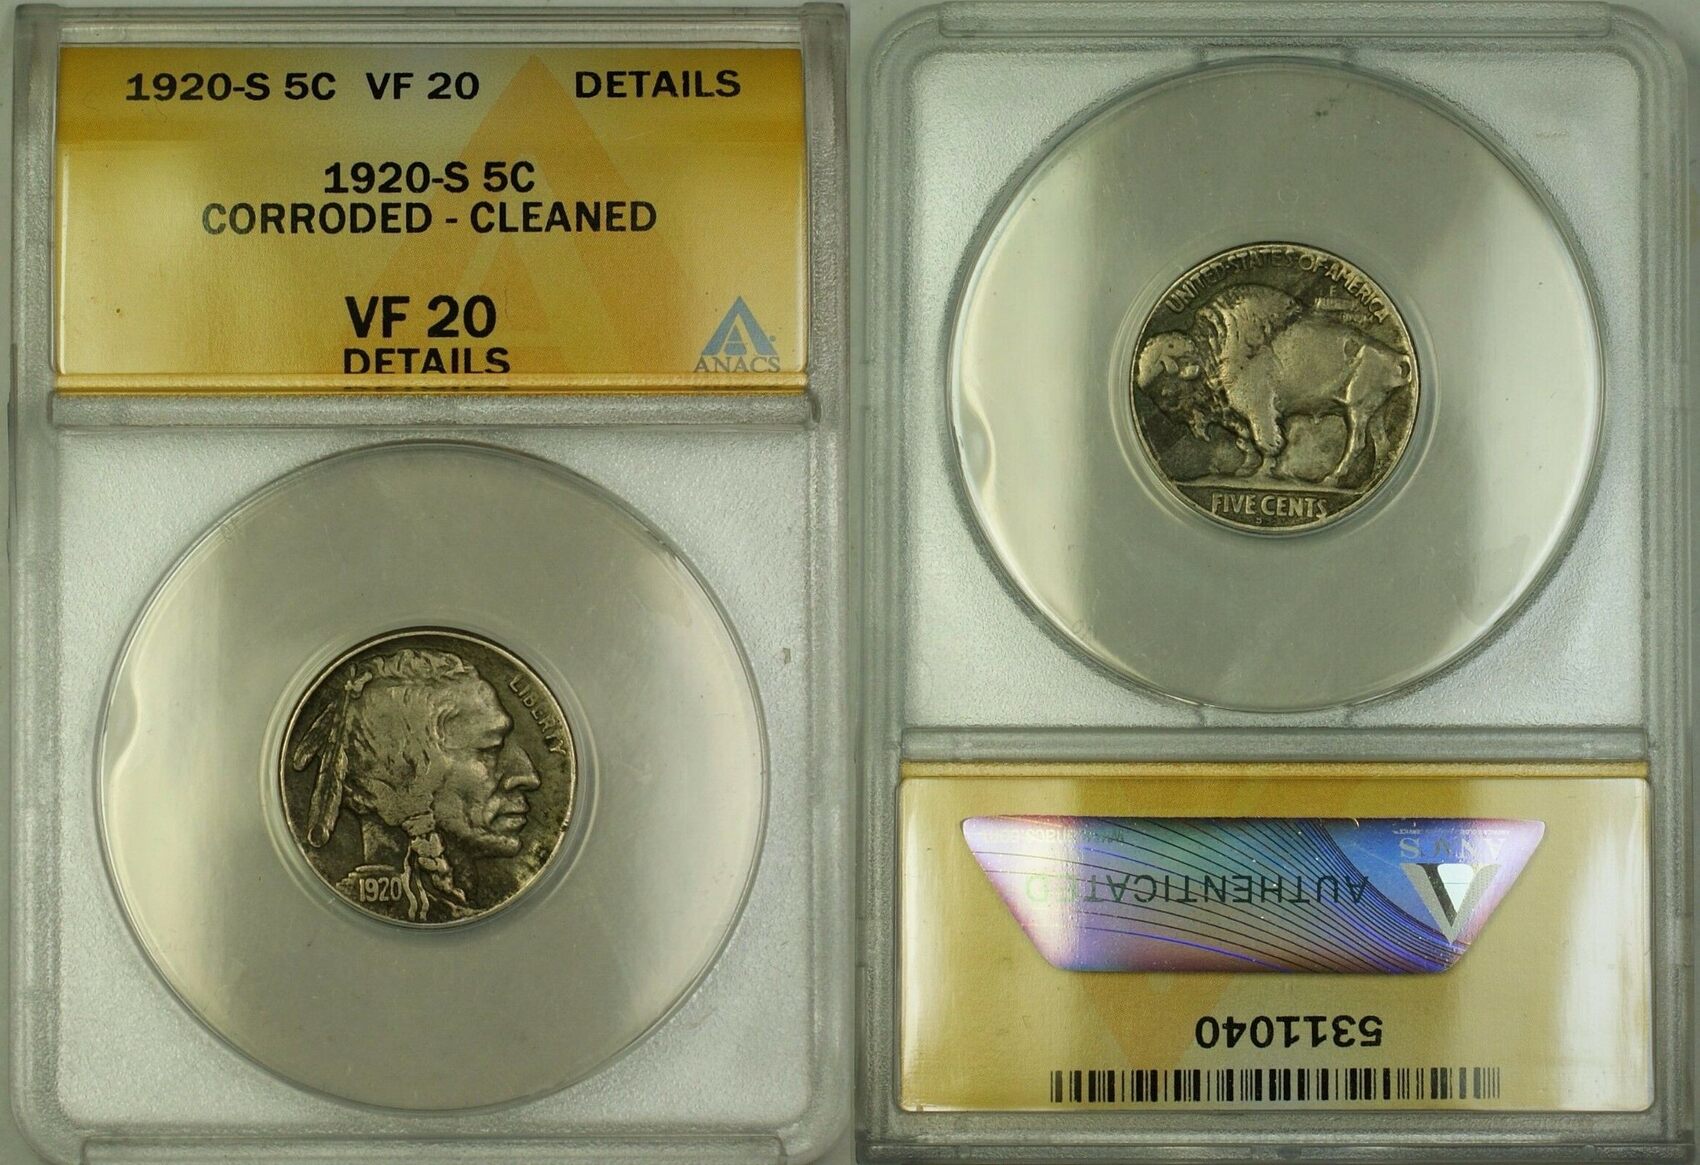 Buffalo Nickel 1920-S 5c Coin ANACS VF-20 Details Corroded Cleaned | MA